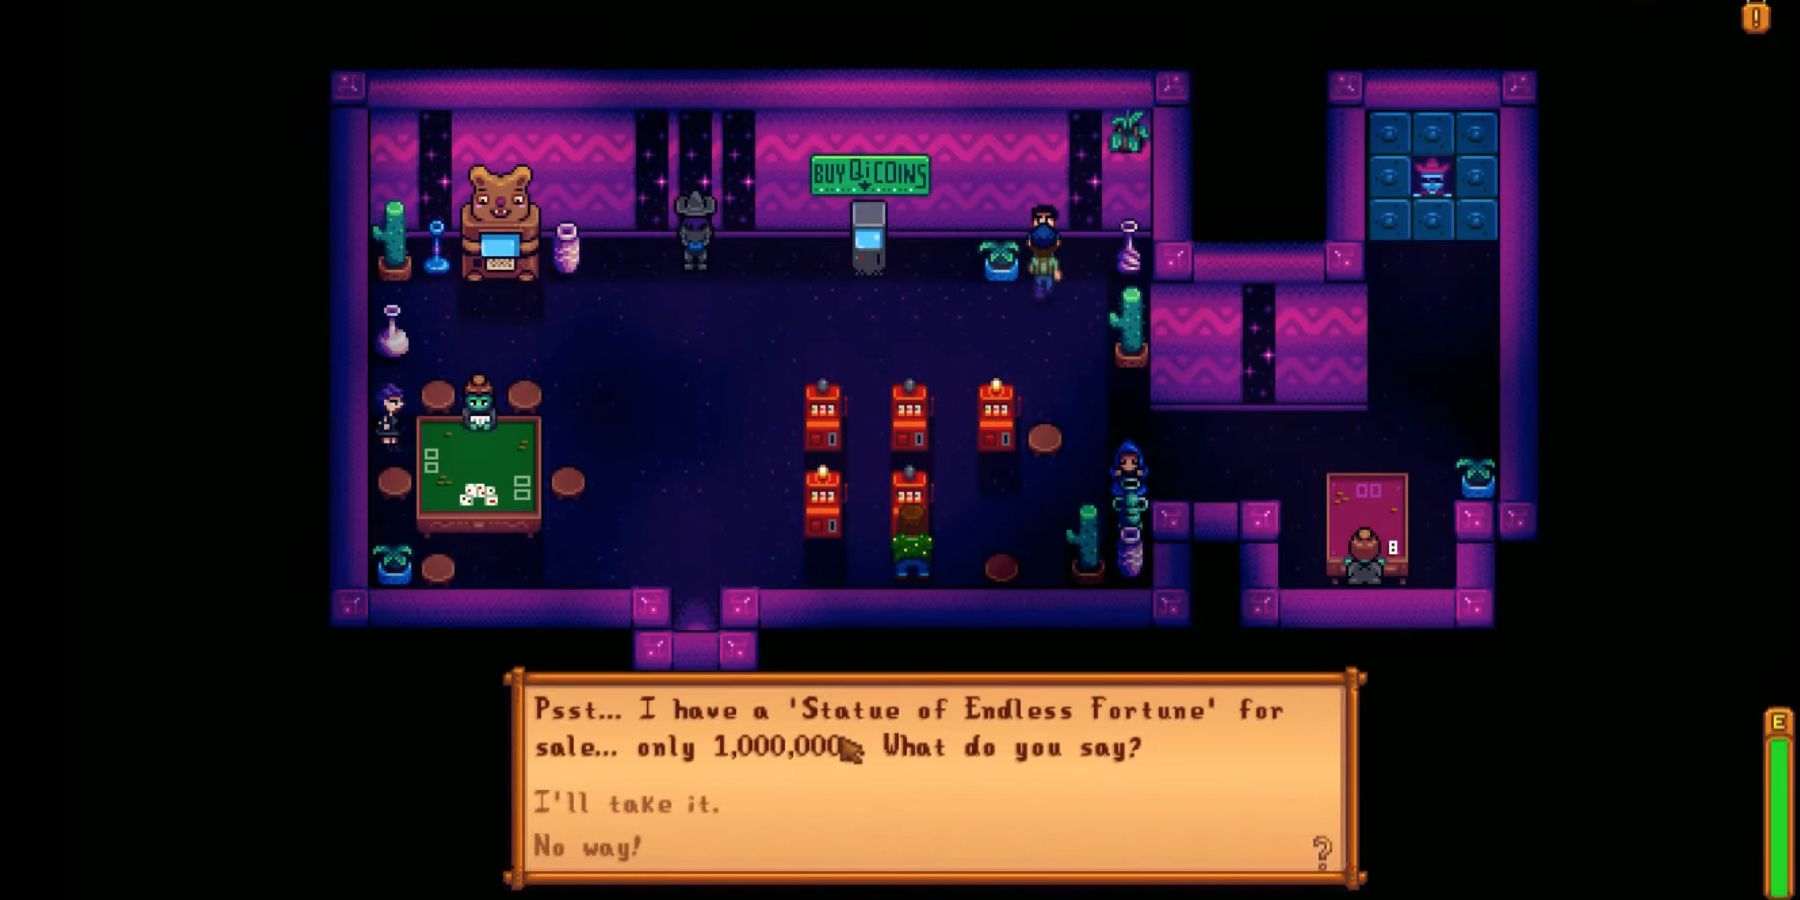 How to Unlock the Statue of Endless Fortune in Stardew Valley